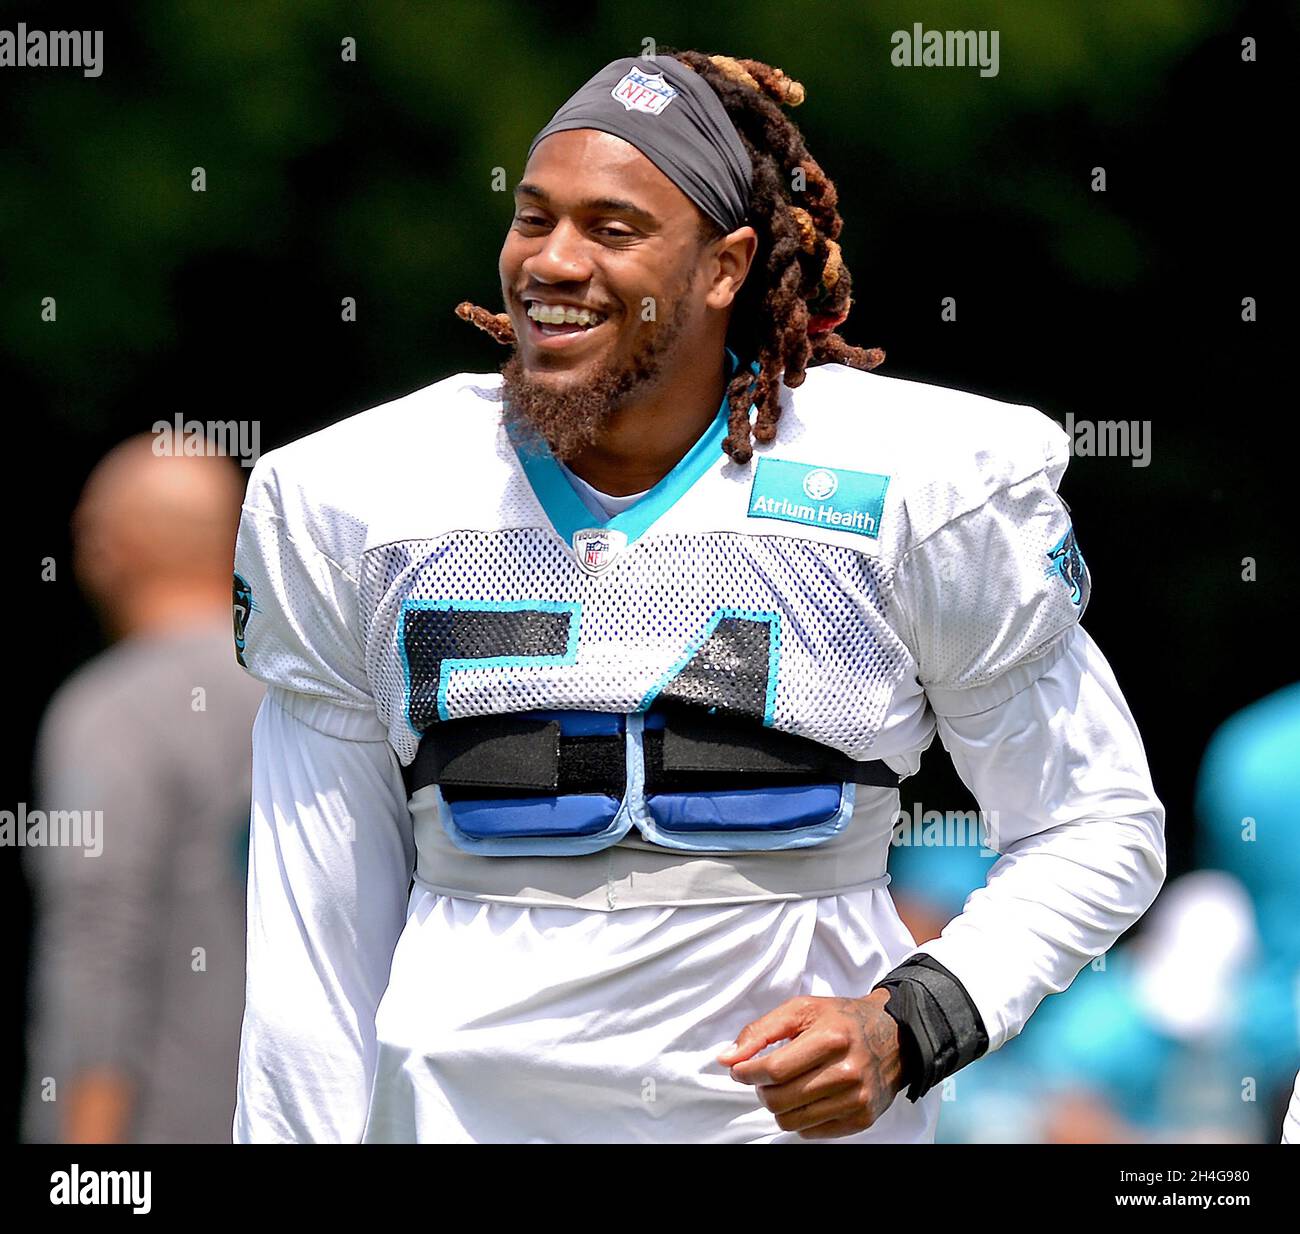 Spartanburg, USA. 26th July, 2019. Carolina Panthers linebacker Shaq Thompson during a training camp session on July 26, 2019, at Wofford College in Spartanburg, South Carolina. (Photo by Jeff Siner/Charlotte Observer/TNS/Sipa USA) Credit: Sipa USA/Alamy Live News Stock Photo